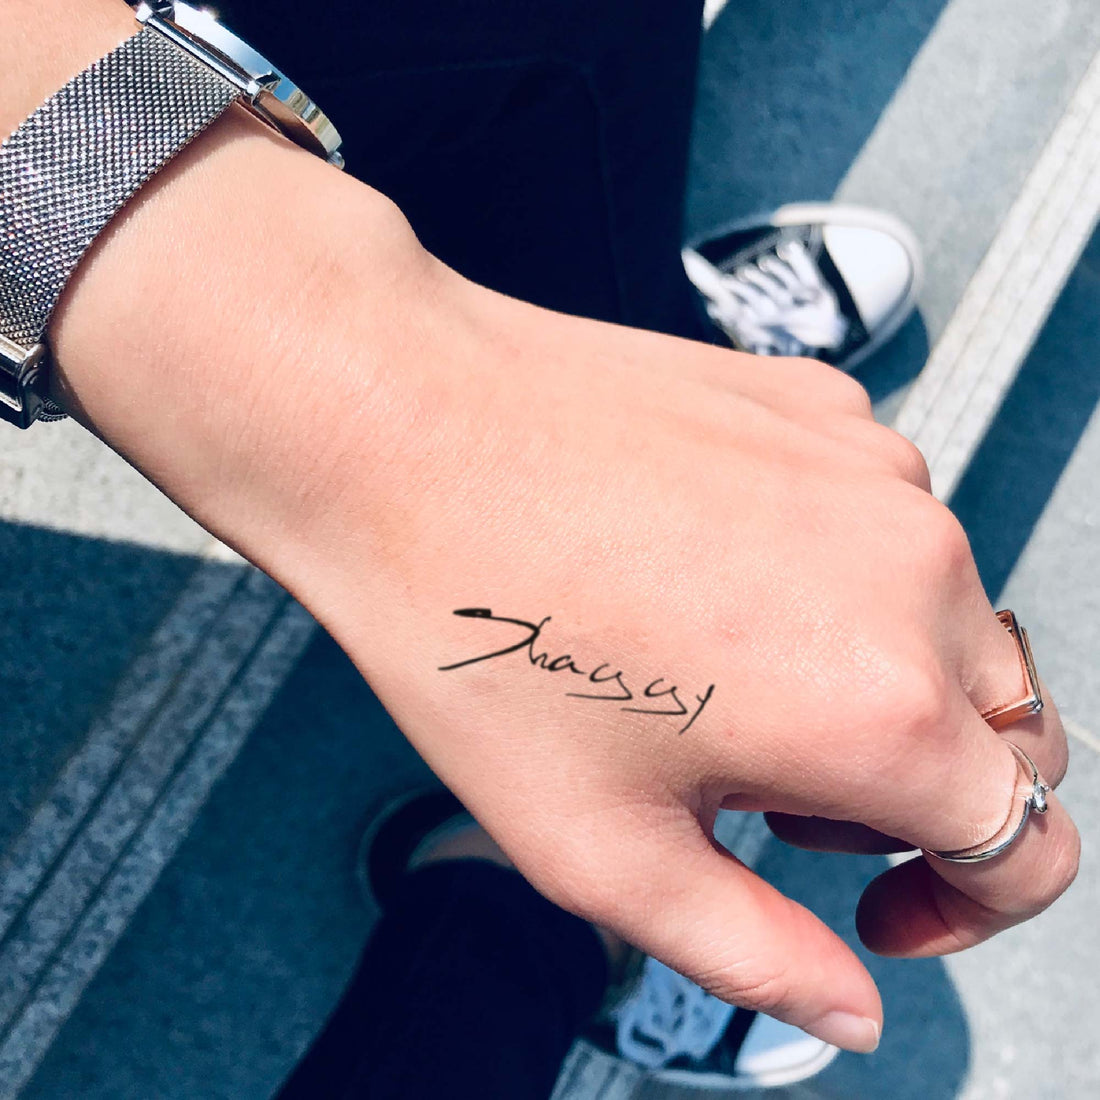 Shaggy custom temporary tattoo sticker design idea inspiration meanings removal arm wrist hand words font name signature calligraphy lyrics tour concert outfits merch accessory gift souvenir costumes wear dress up code